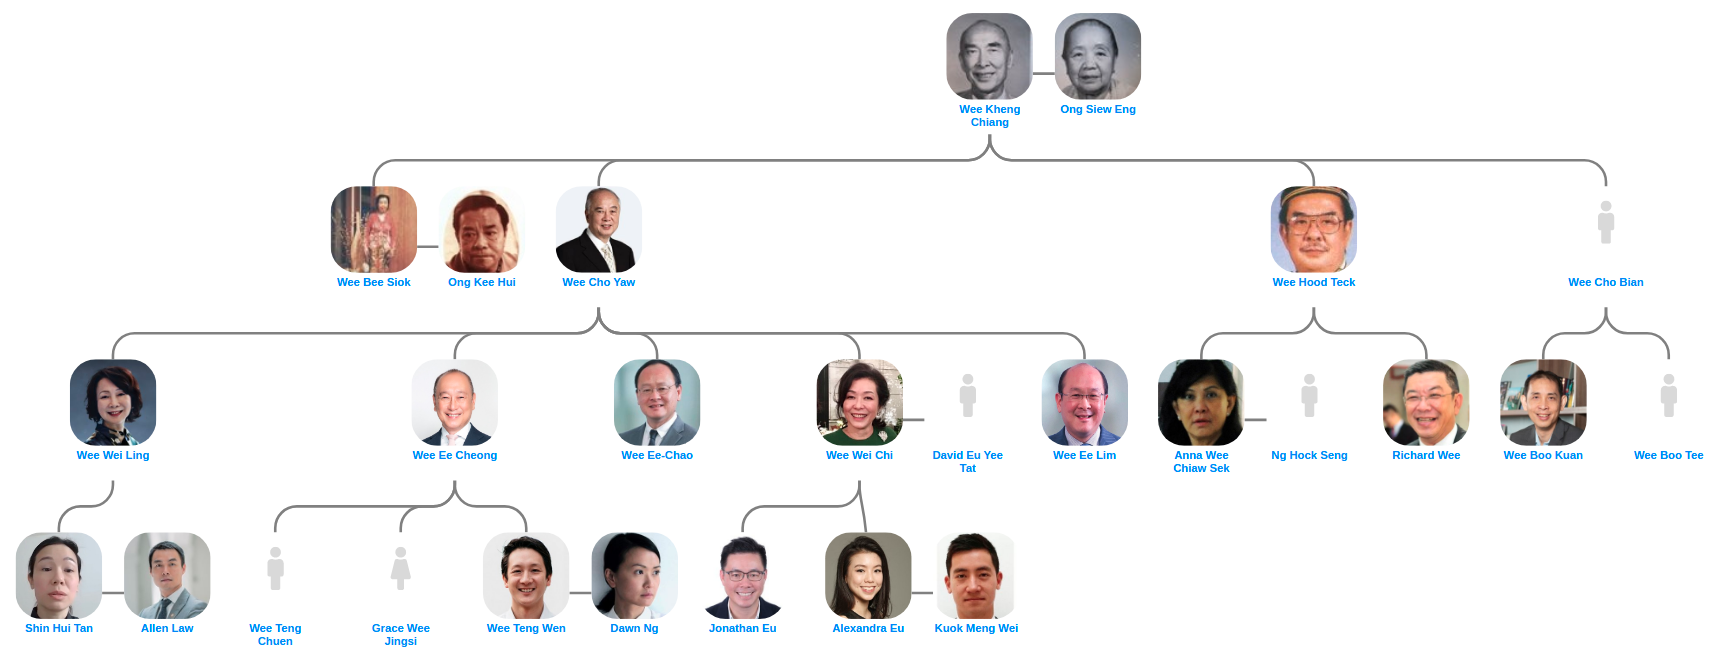 The Wee family tree - Blog for Entitree